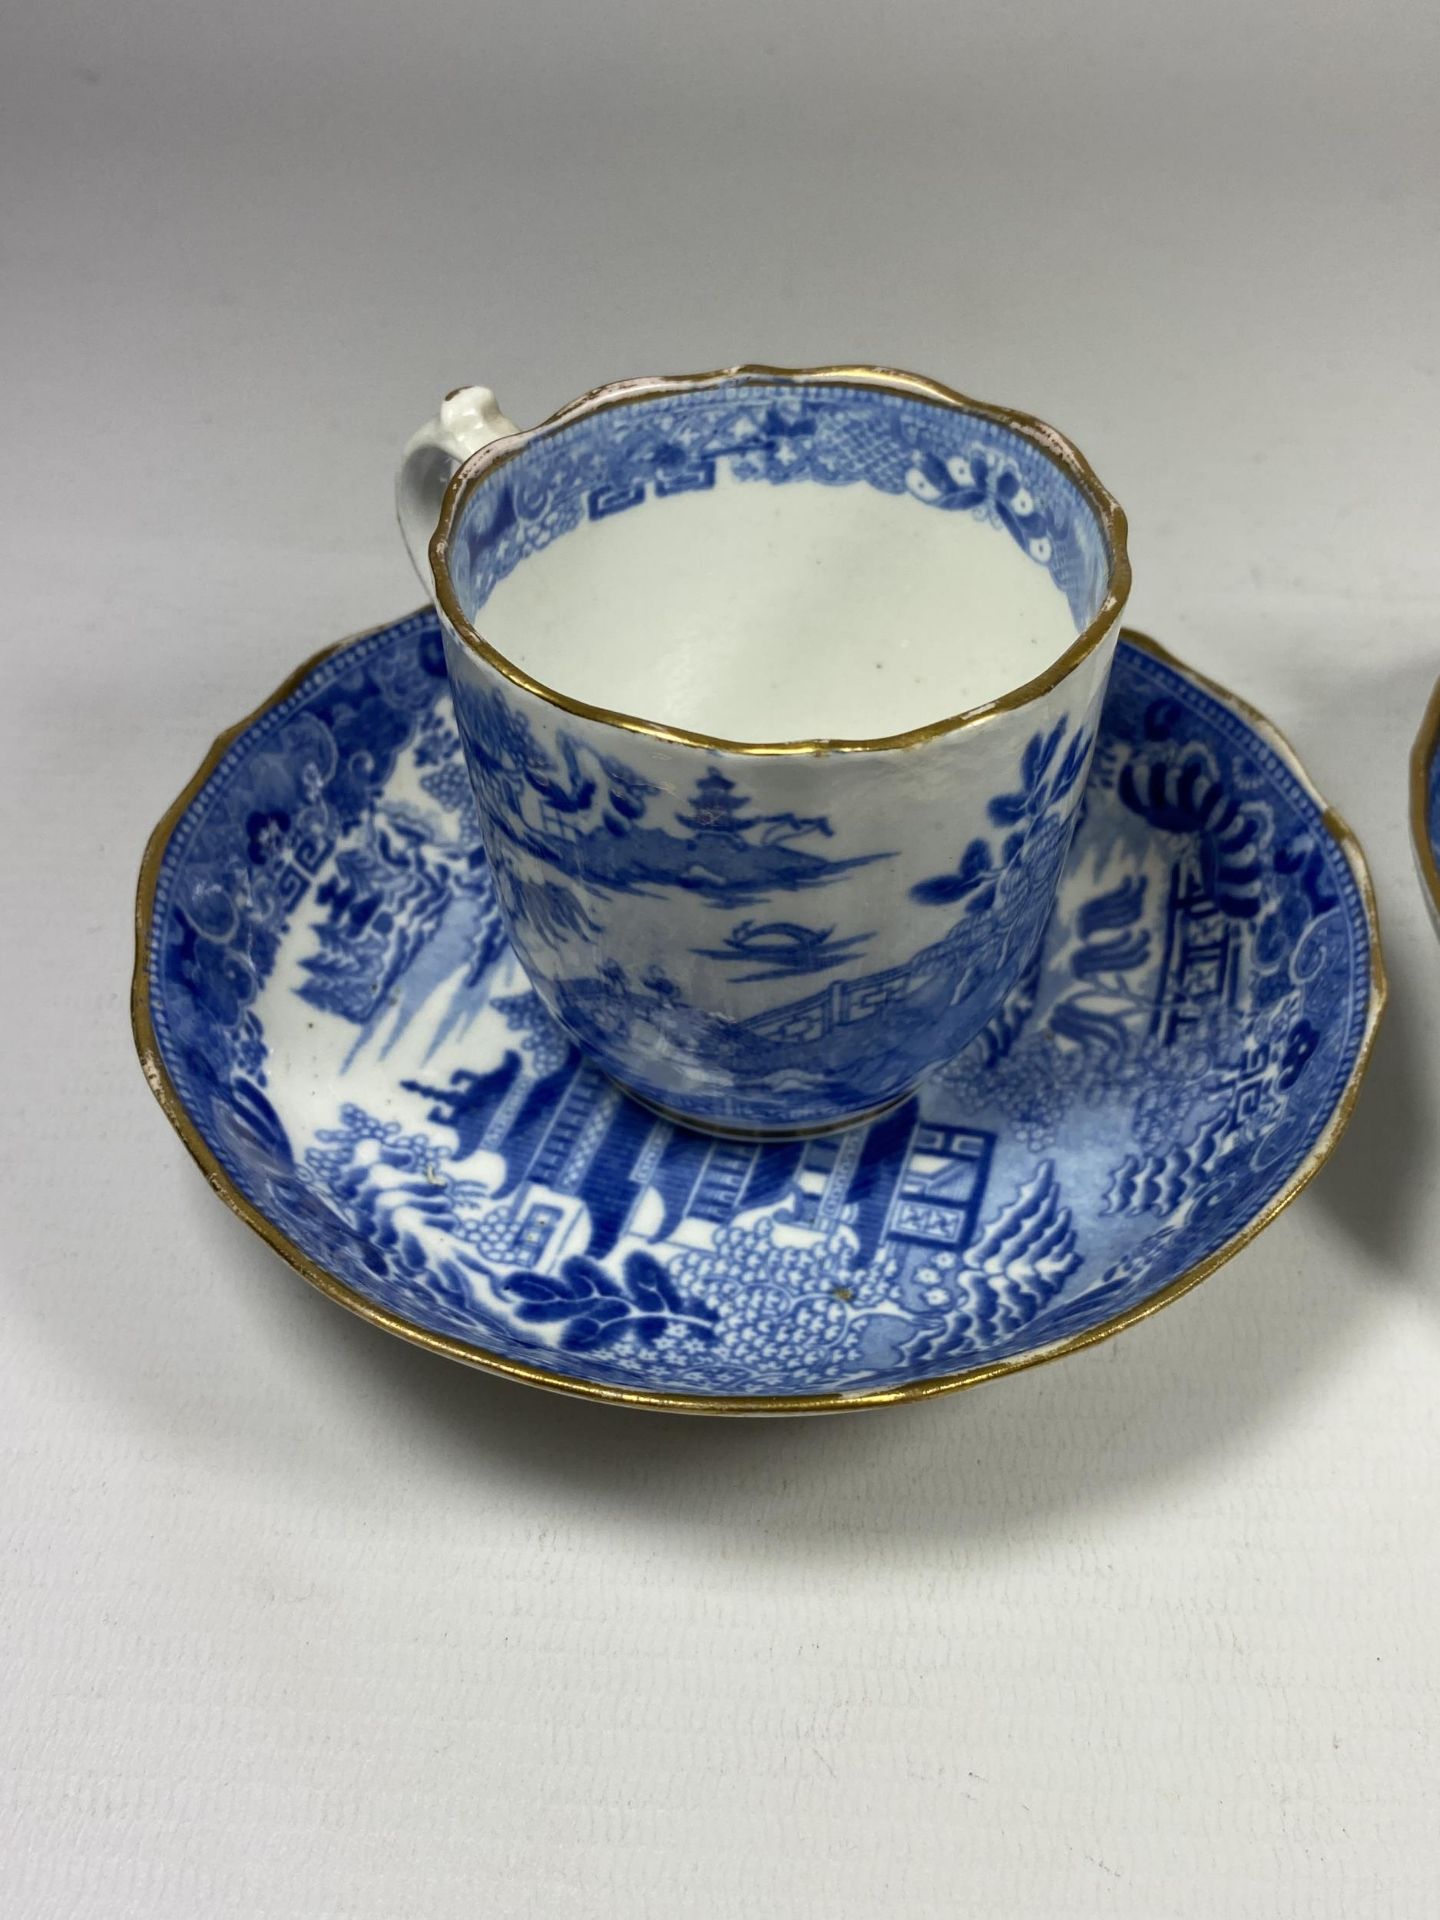 TWO CHINESE QING EXPORT BLUE AND WHITE PORCELAIN CUPS & SAUCERS, CUP HEIGHT 6.5CM - Image 2 of 6